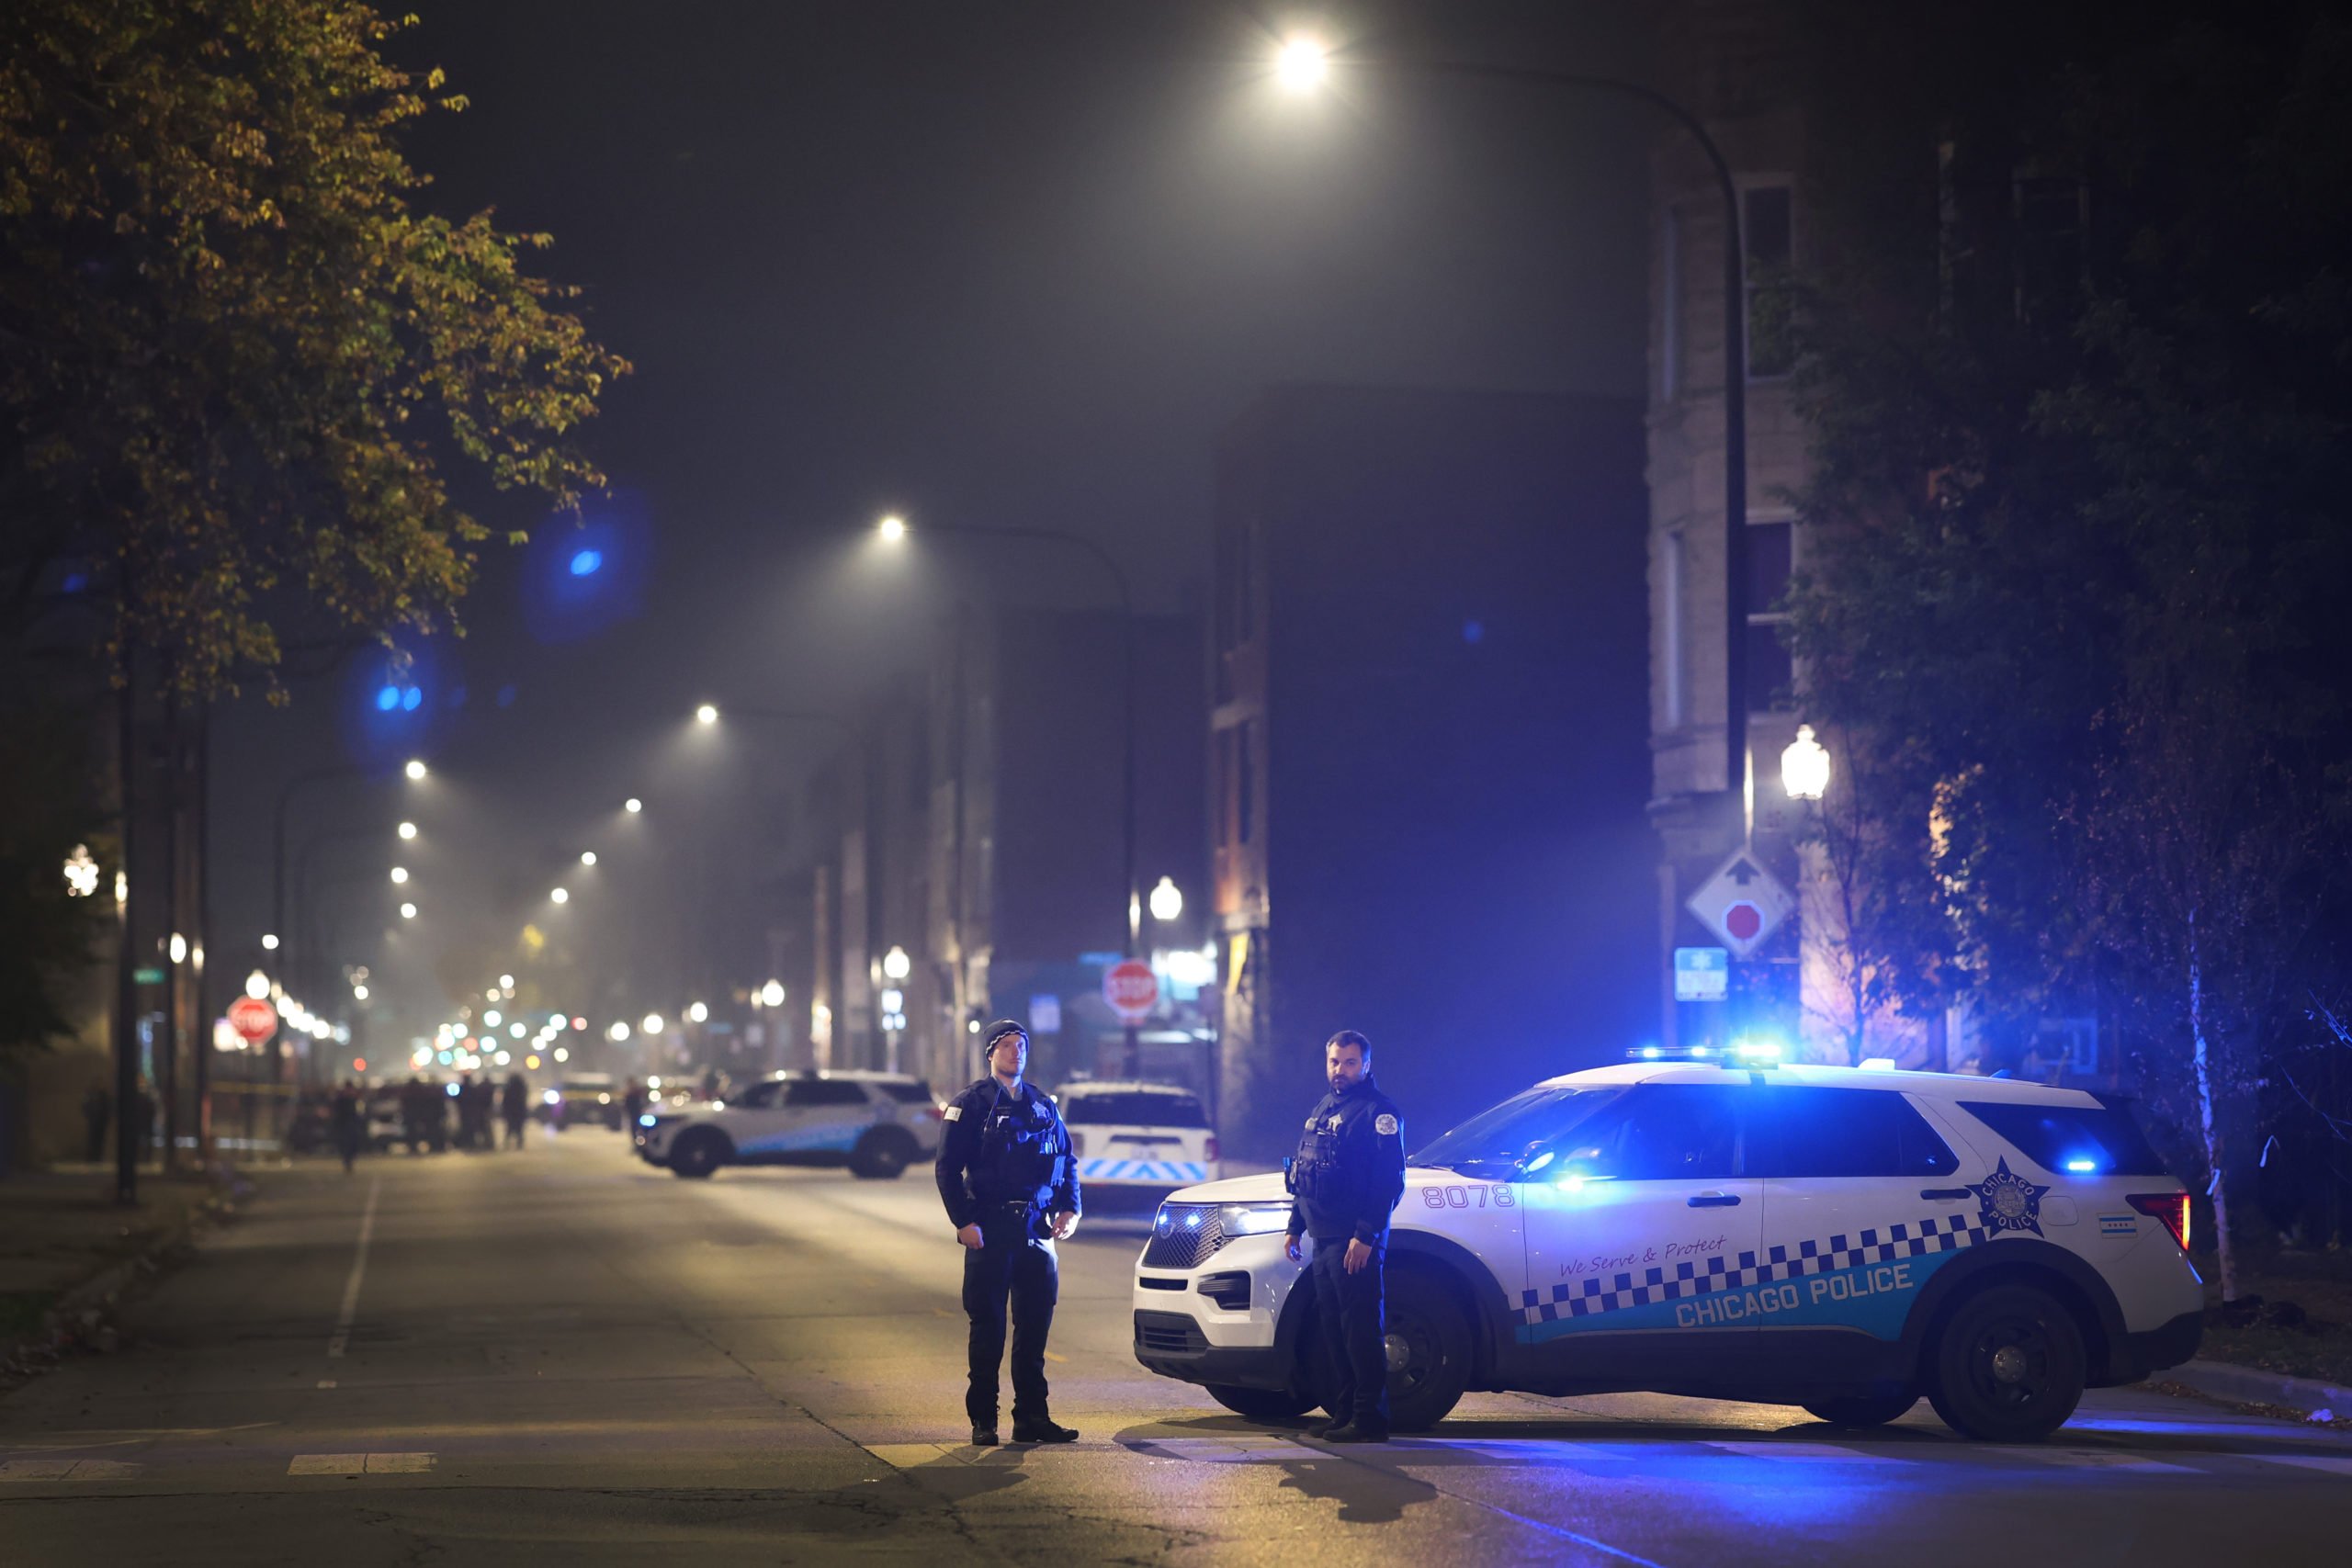 CHICAGO, ILLINOIS - OCTOBER 31: Police investigate the scene where as many as 14 people were reported to have been shot on October 31, 2022 in Chicago, Illinois. Three juveniles were among those reported to have been wounded in the drive-by shooting, according to published reports. (Photo by Scott Olson/Getty Images)